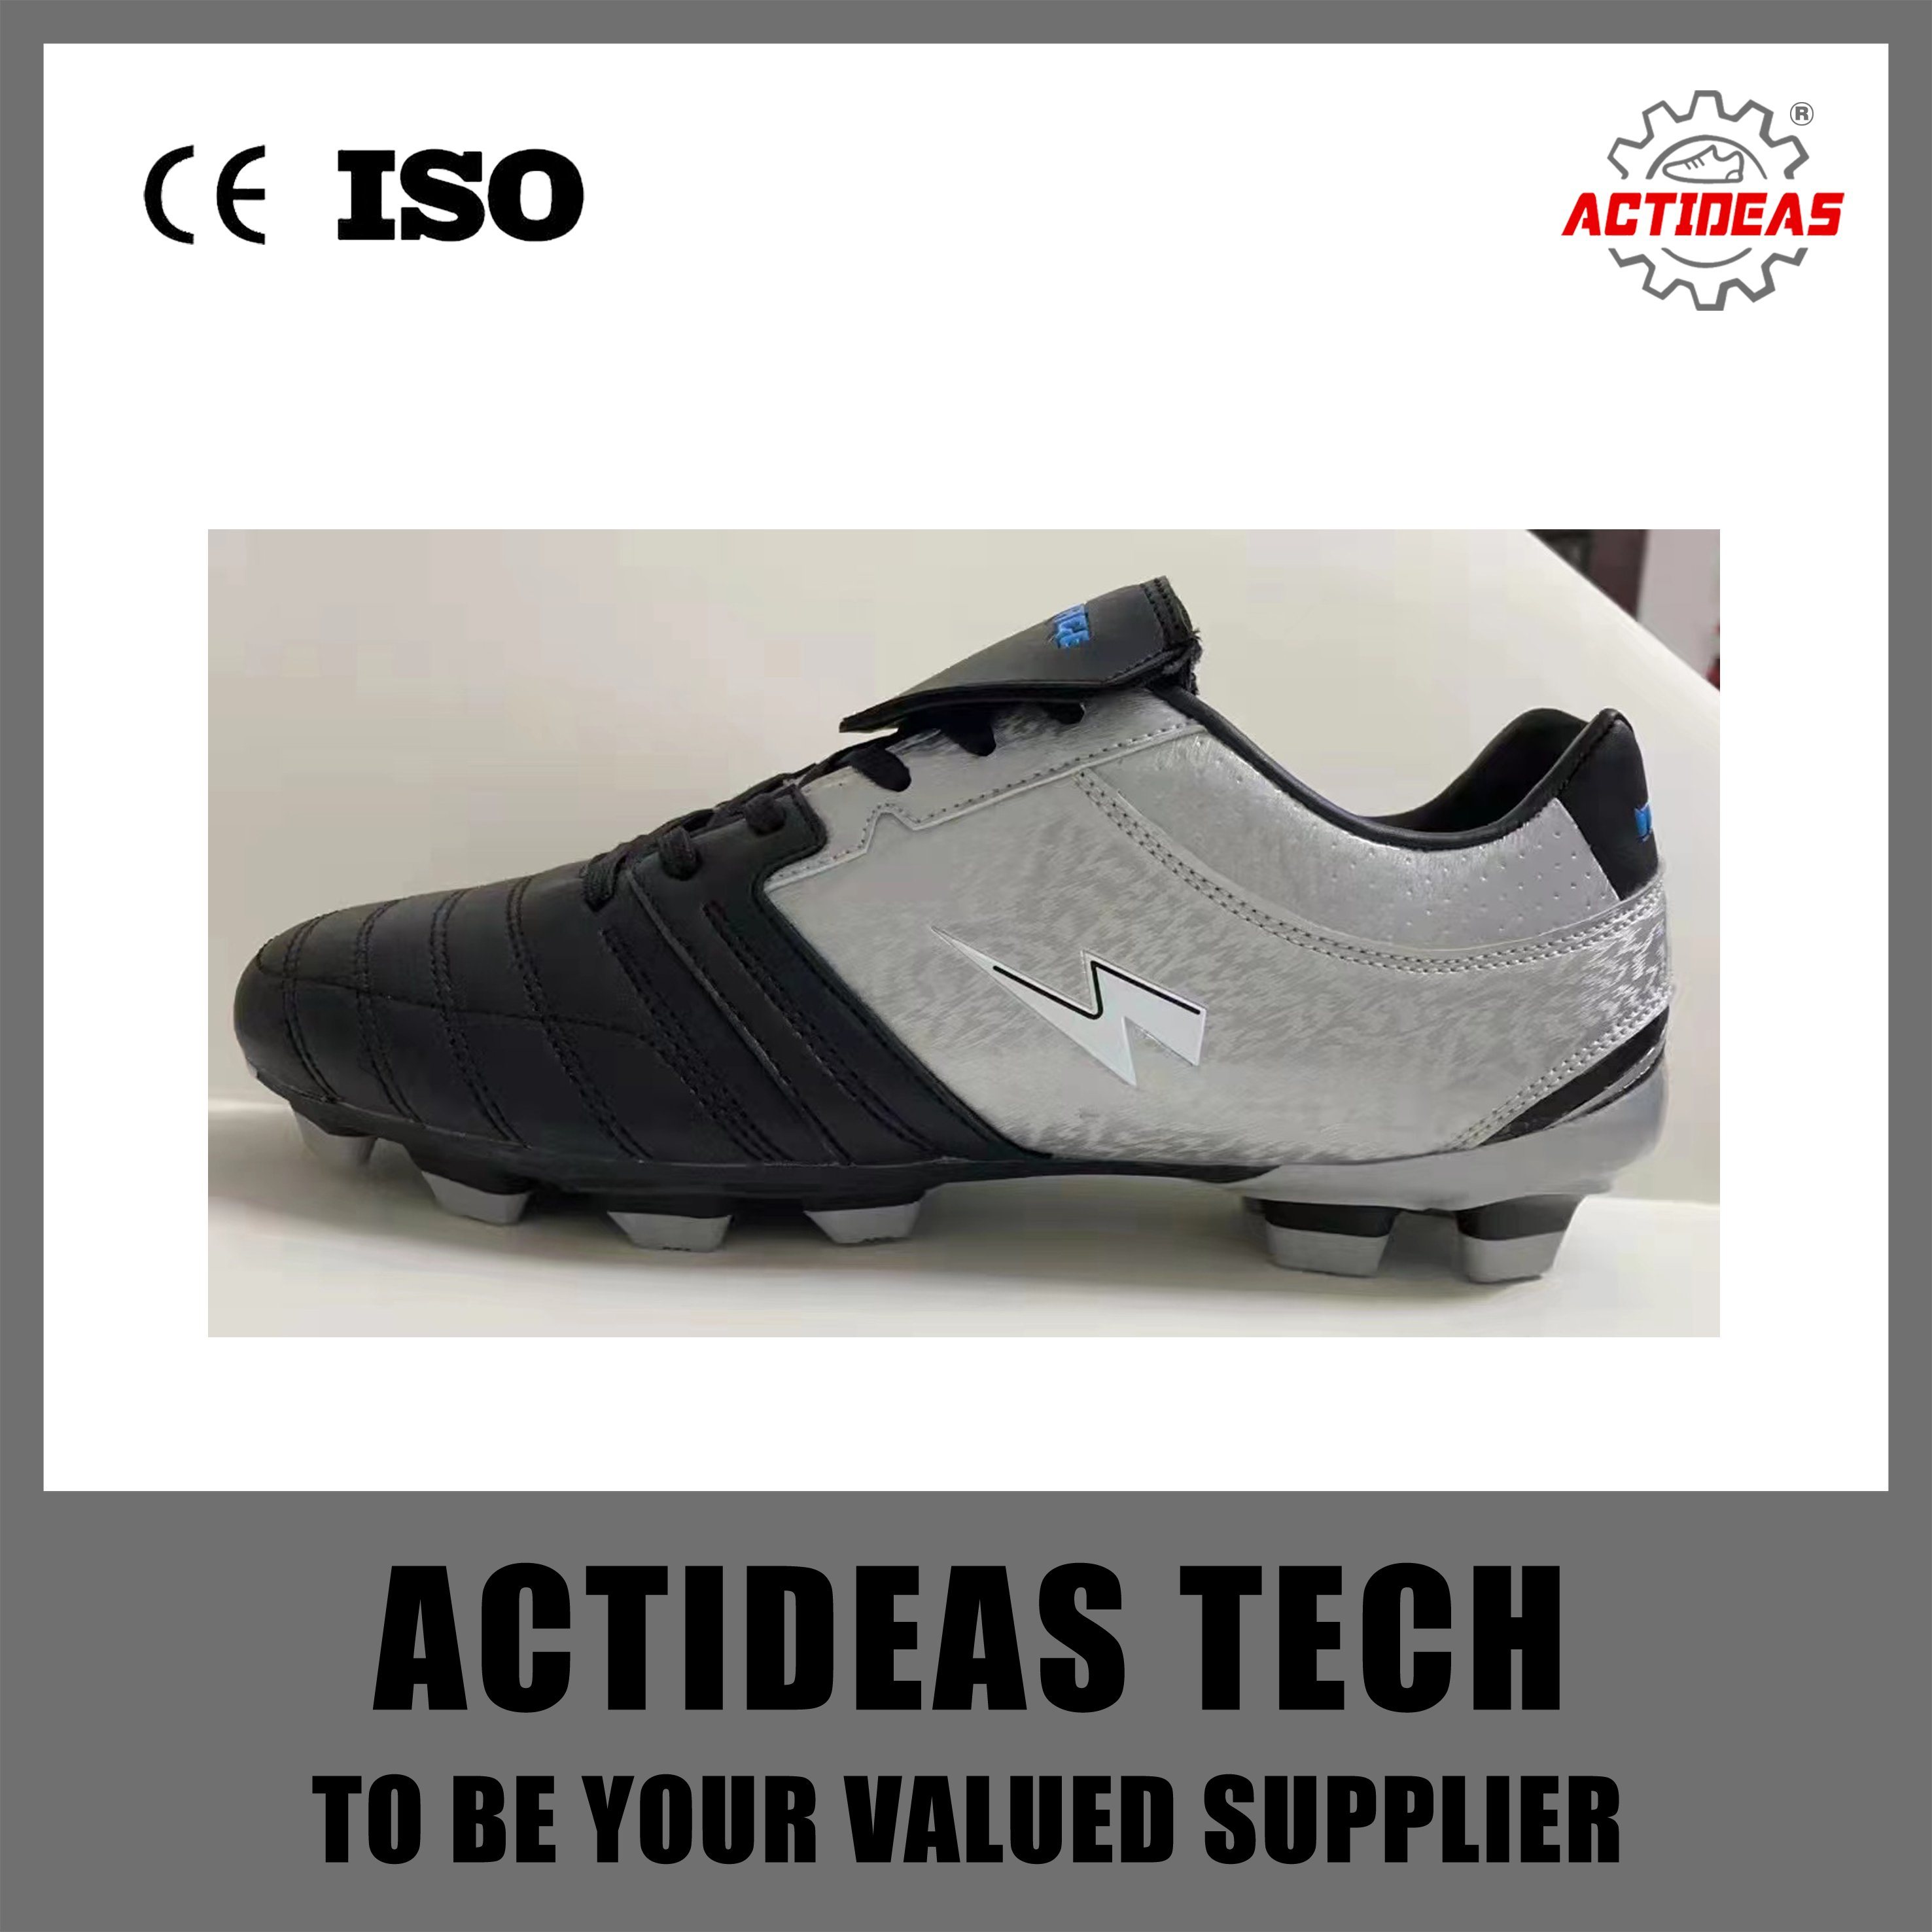 2022 Hot Sale High Quality Factory Soccer Shoes Football Boots